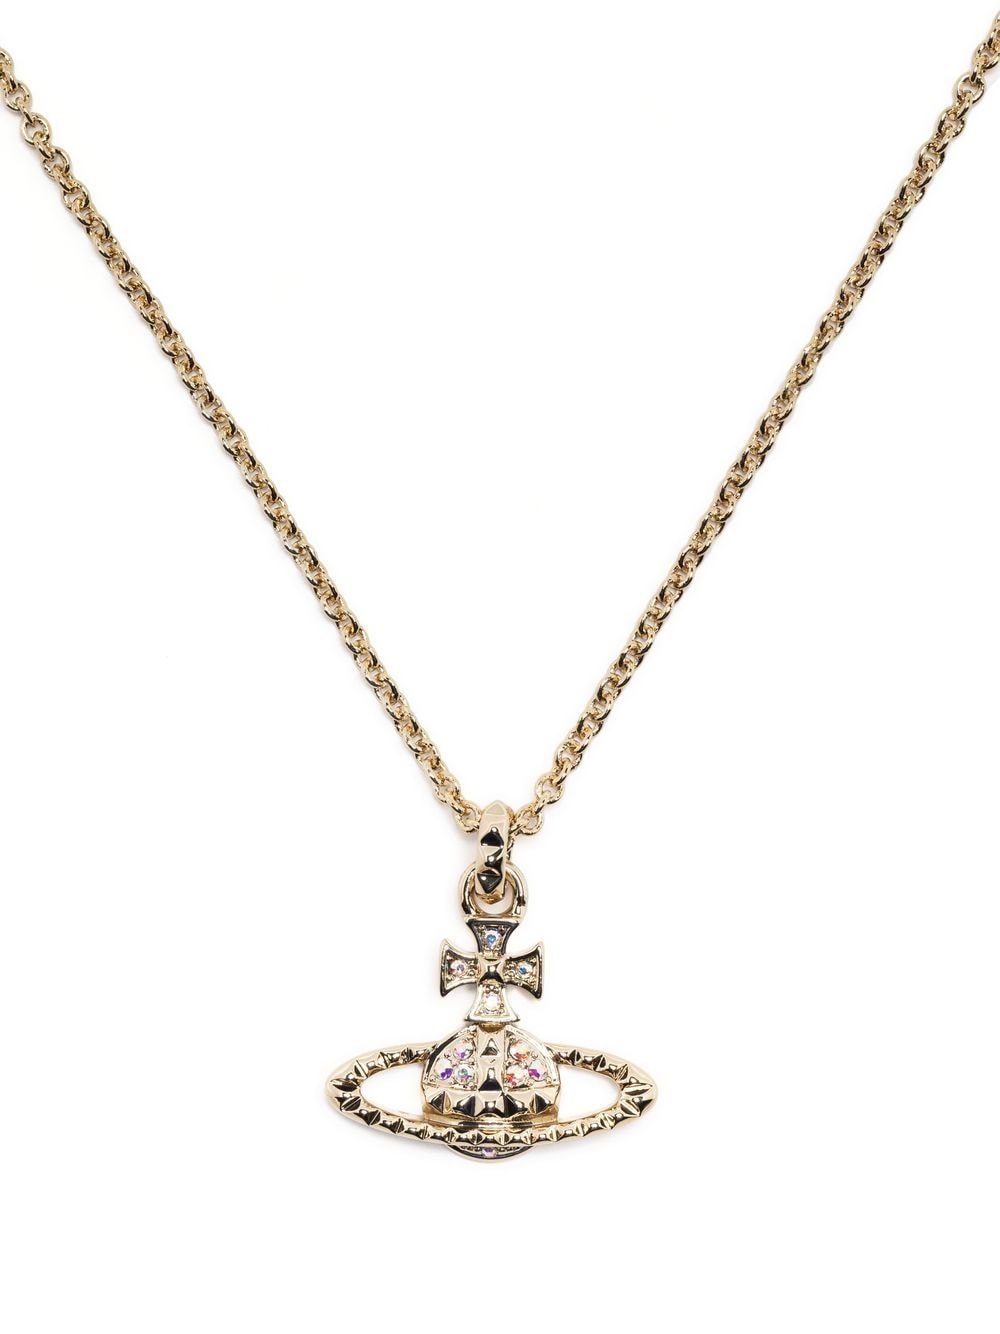 Vivienne Westwood Mayfair Bas Relief Pendant Necklace In Gold | ModeSens